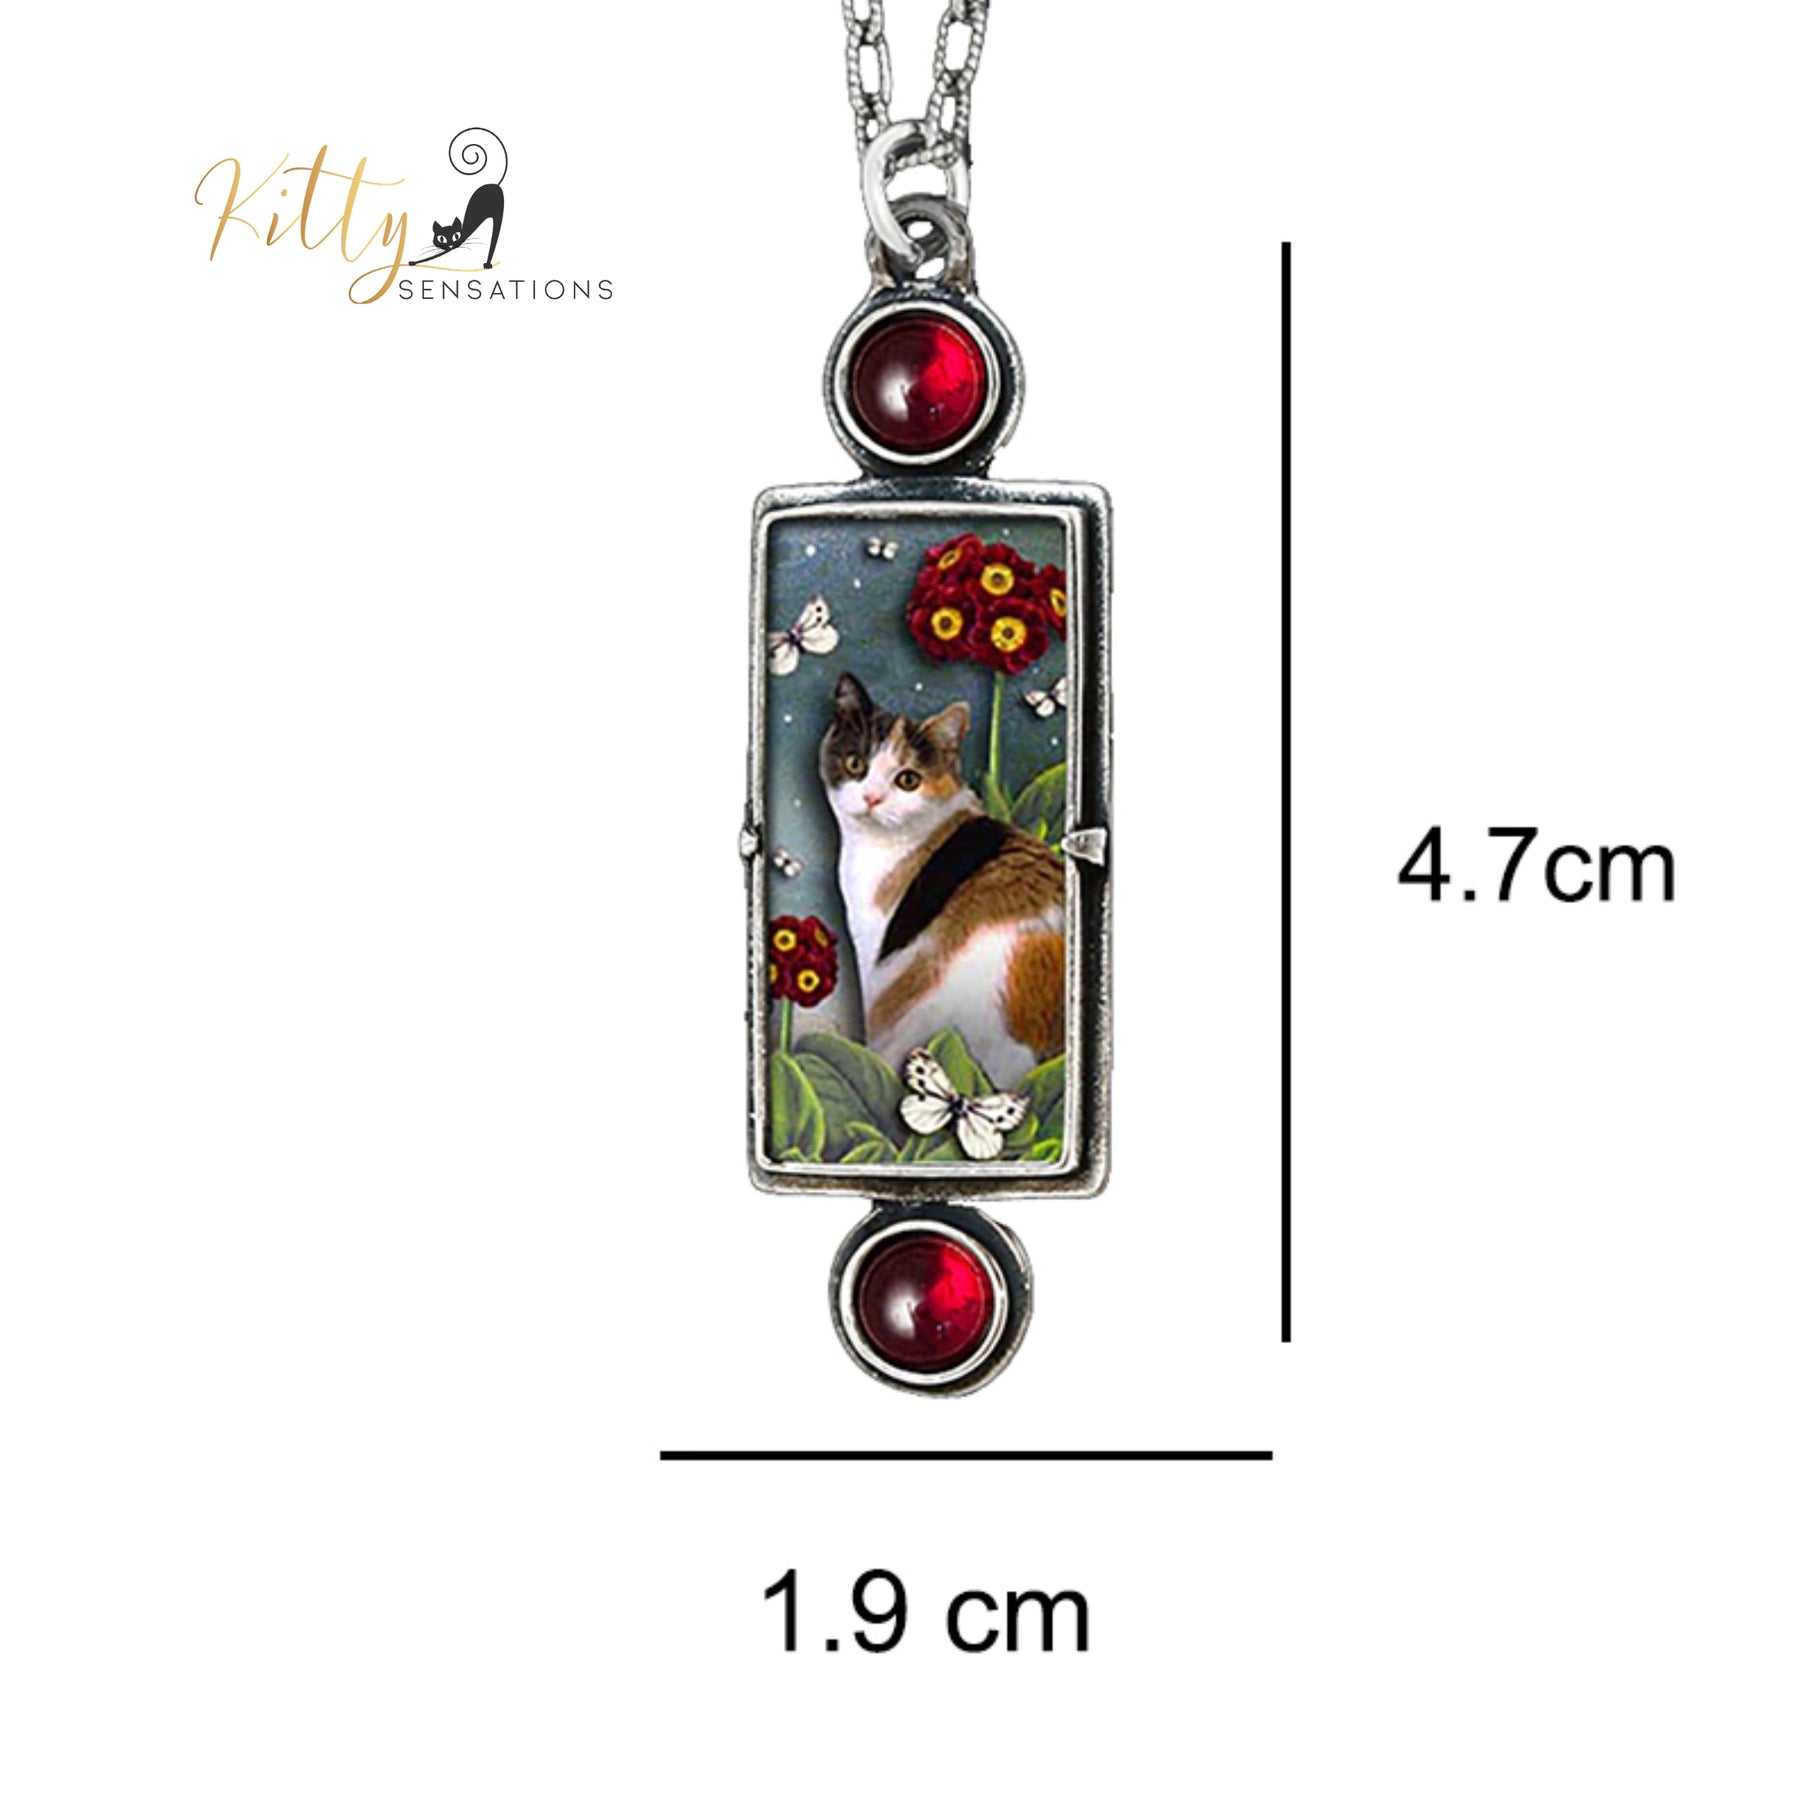 www.KittySensations.com: Two Garnets and A Kitty Necklace - Adjustable Length ($18.35): https://www.kittysensations.com/products/two-garnets-and-a-kitty-necklace